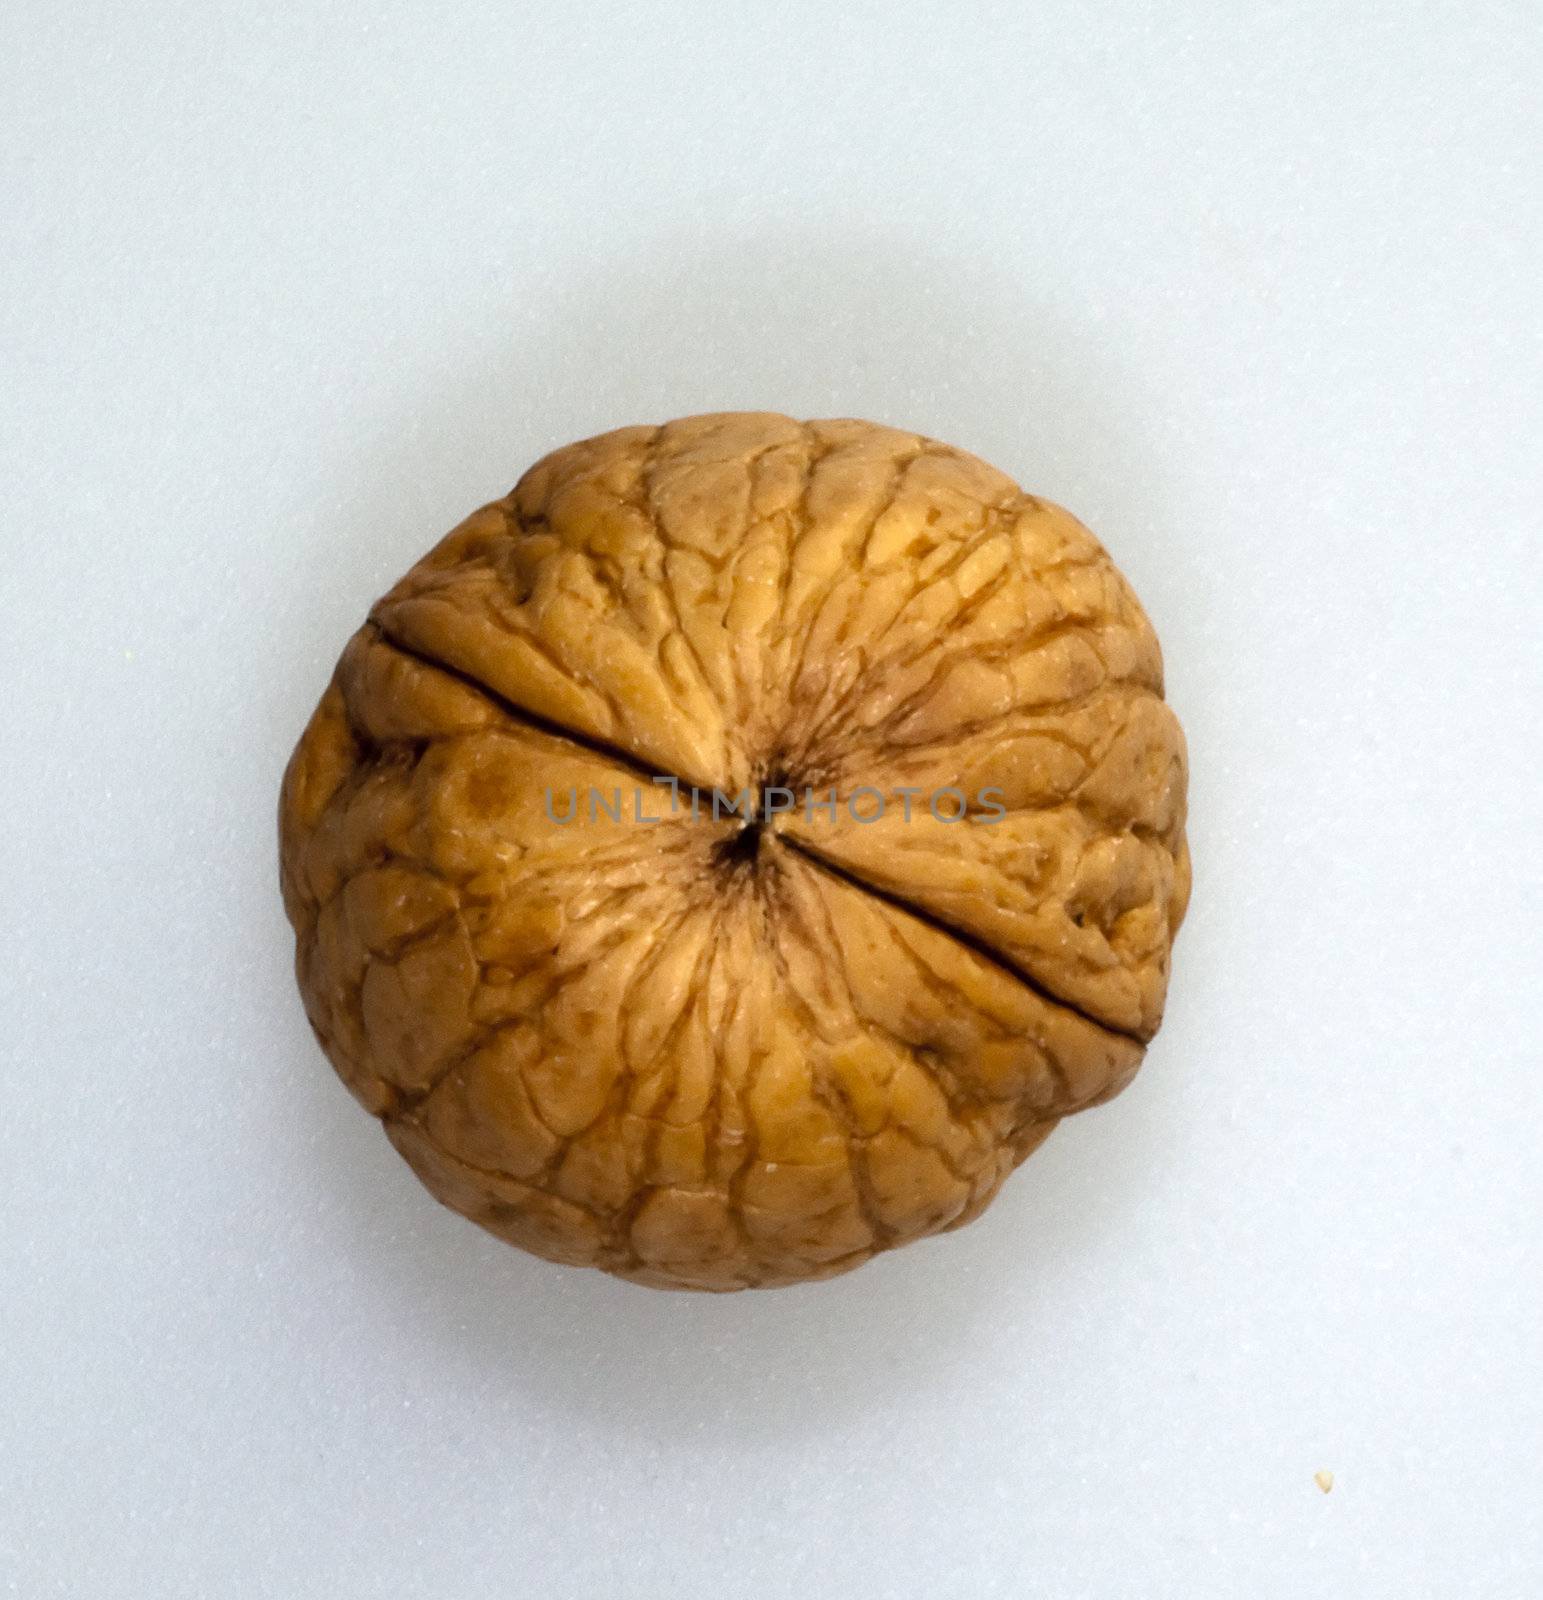 Closeup of single walnut seen from above, white background